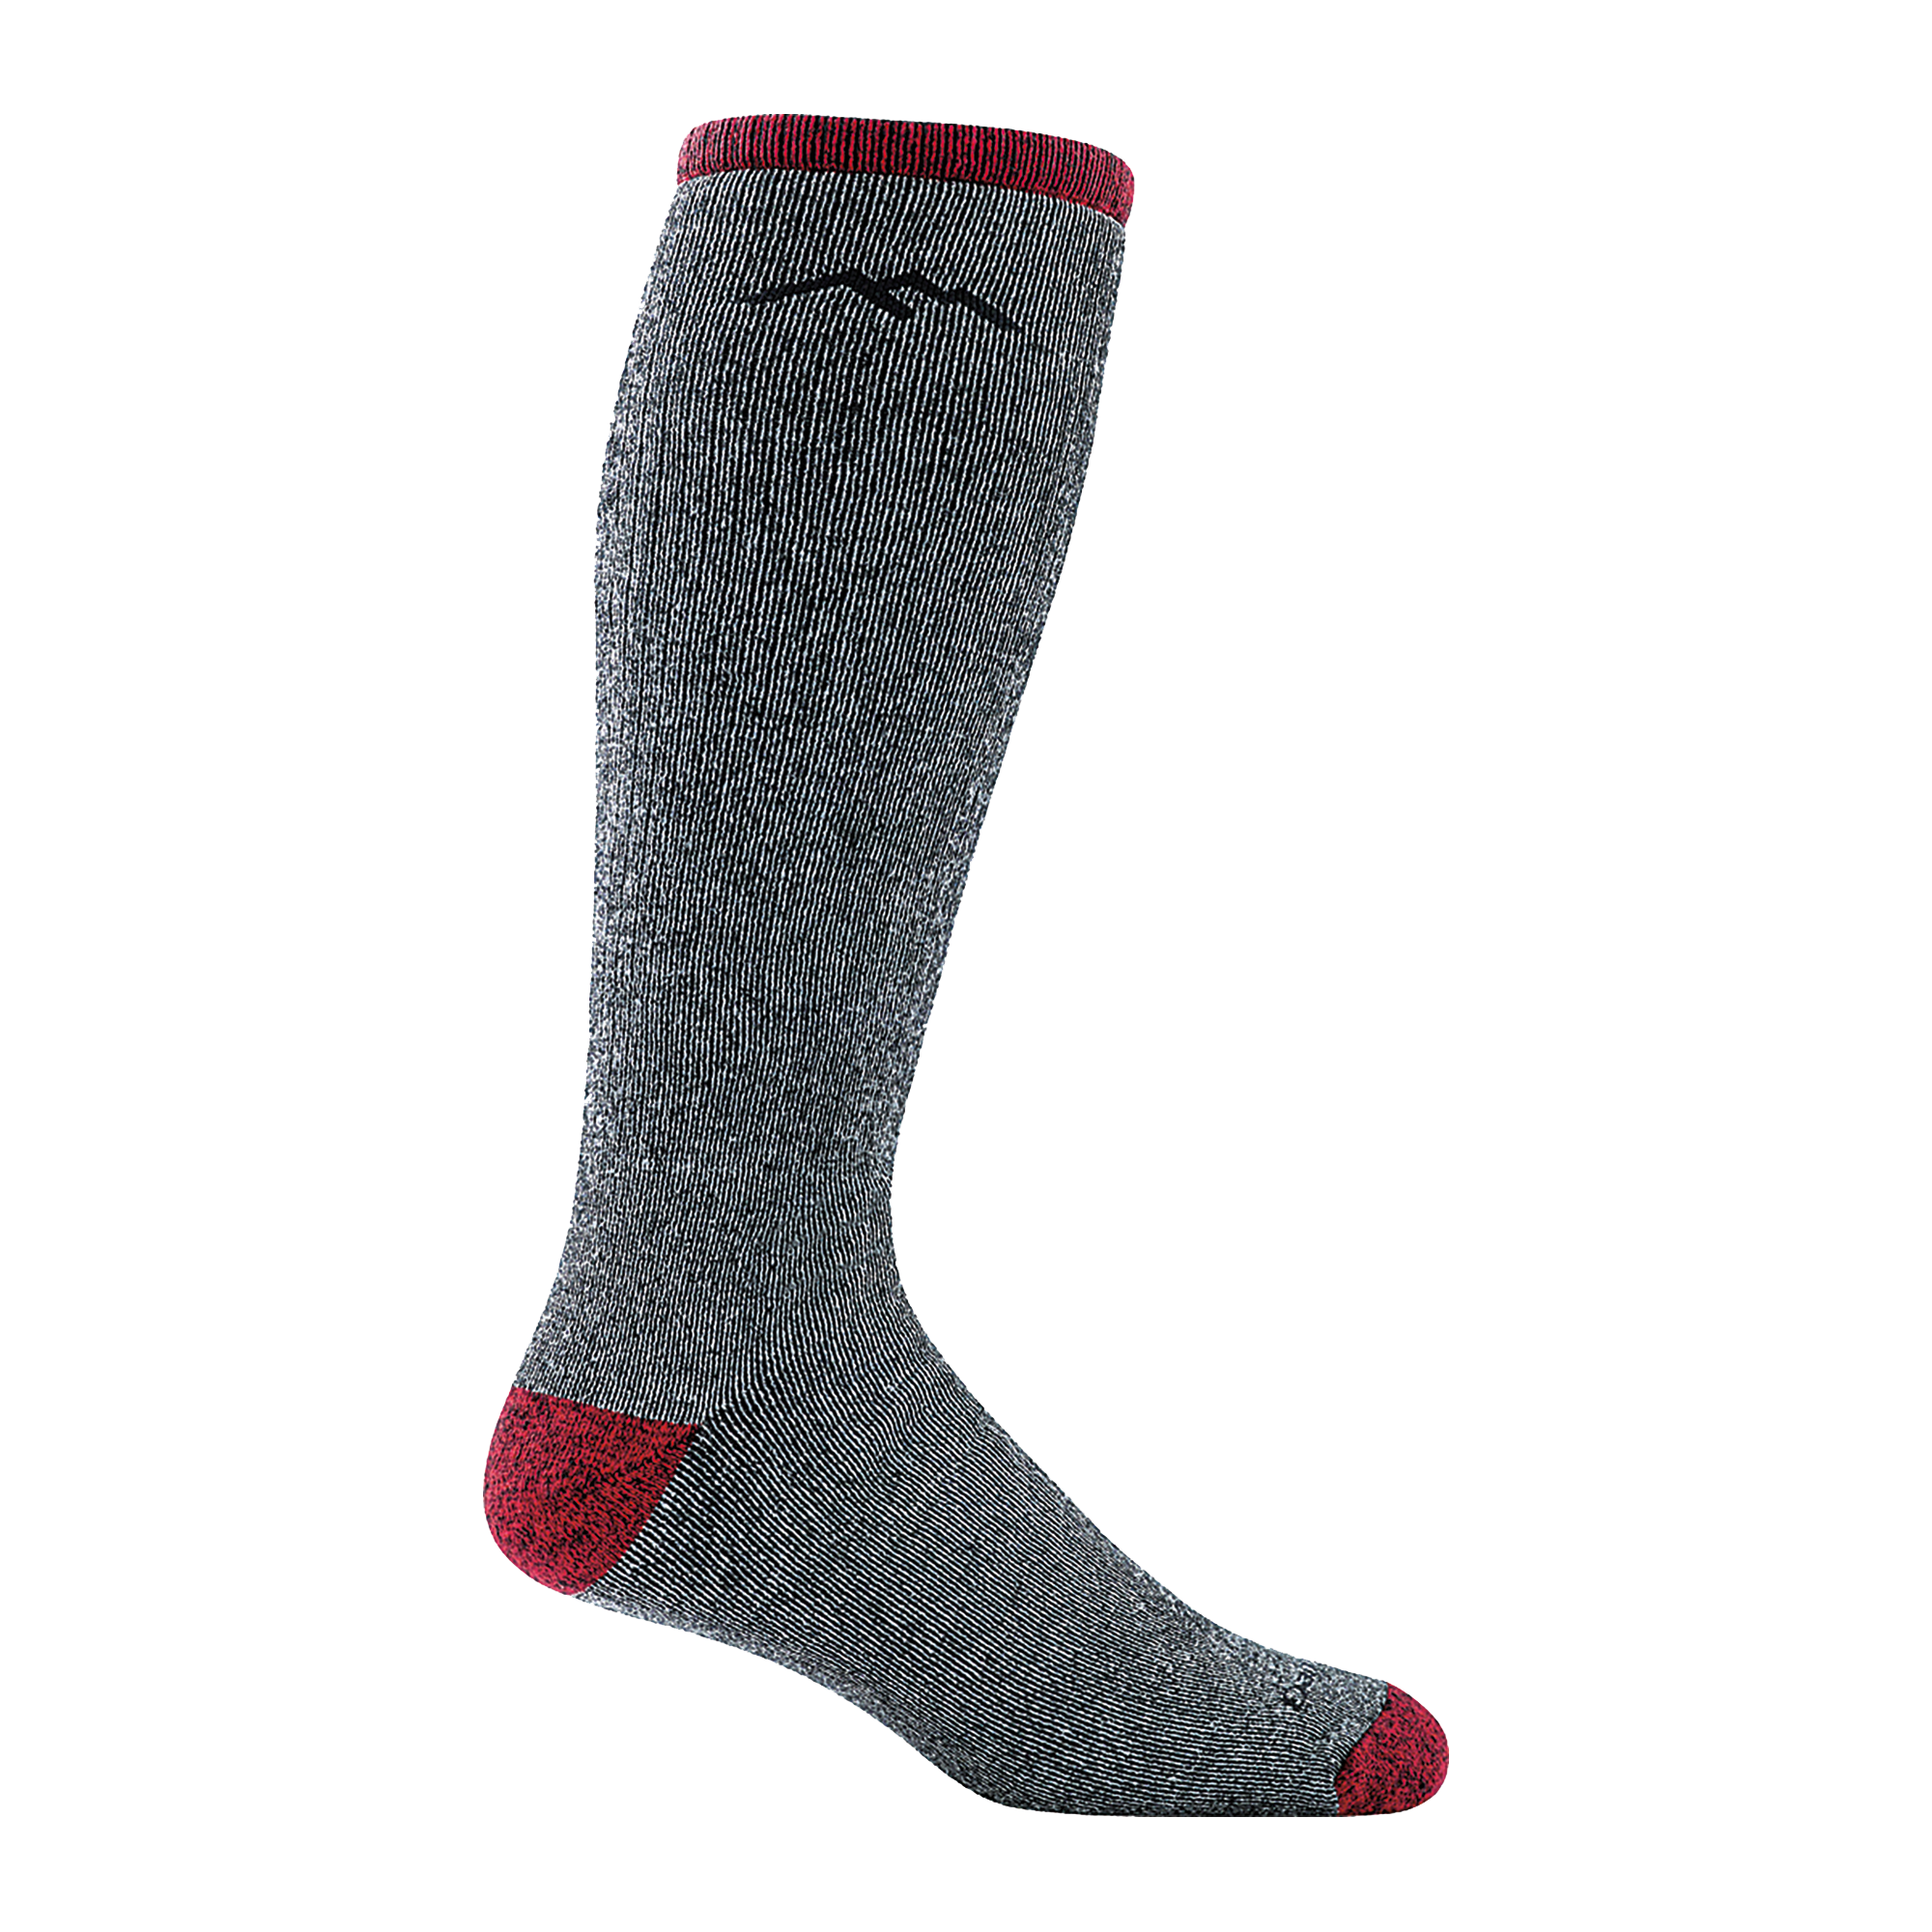 1955 men's mountaineering over-the-calf hiking sock in color smoke gray with red heathered toe/heel accents